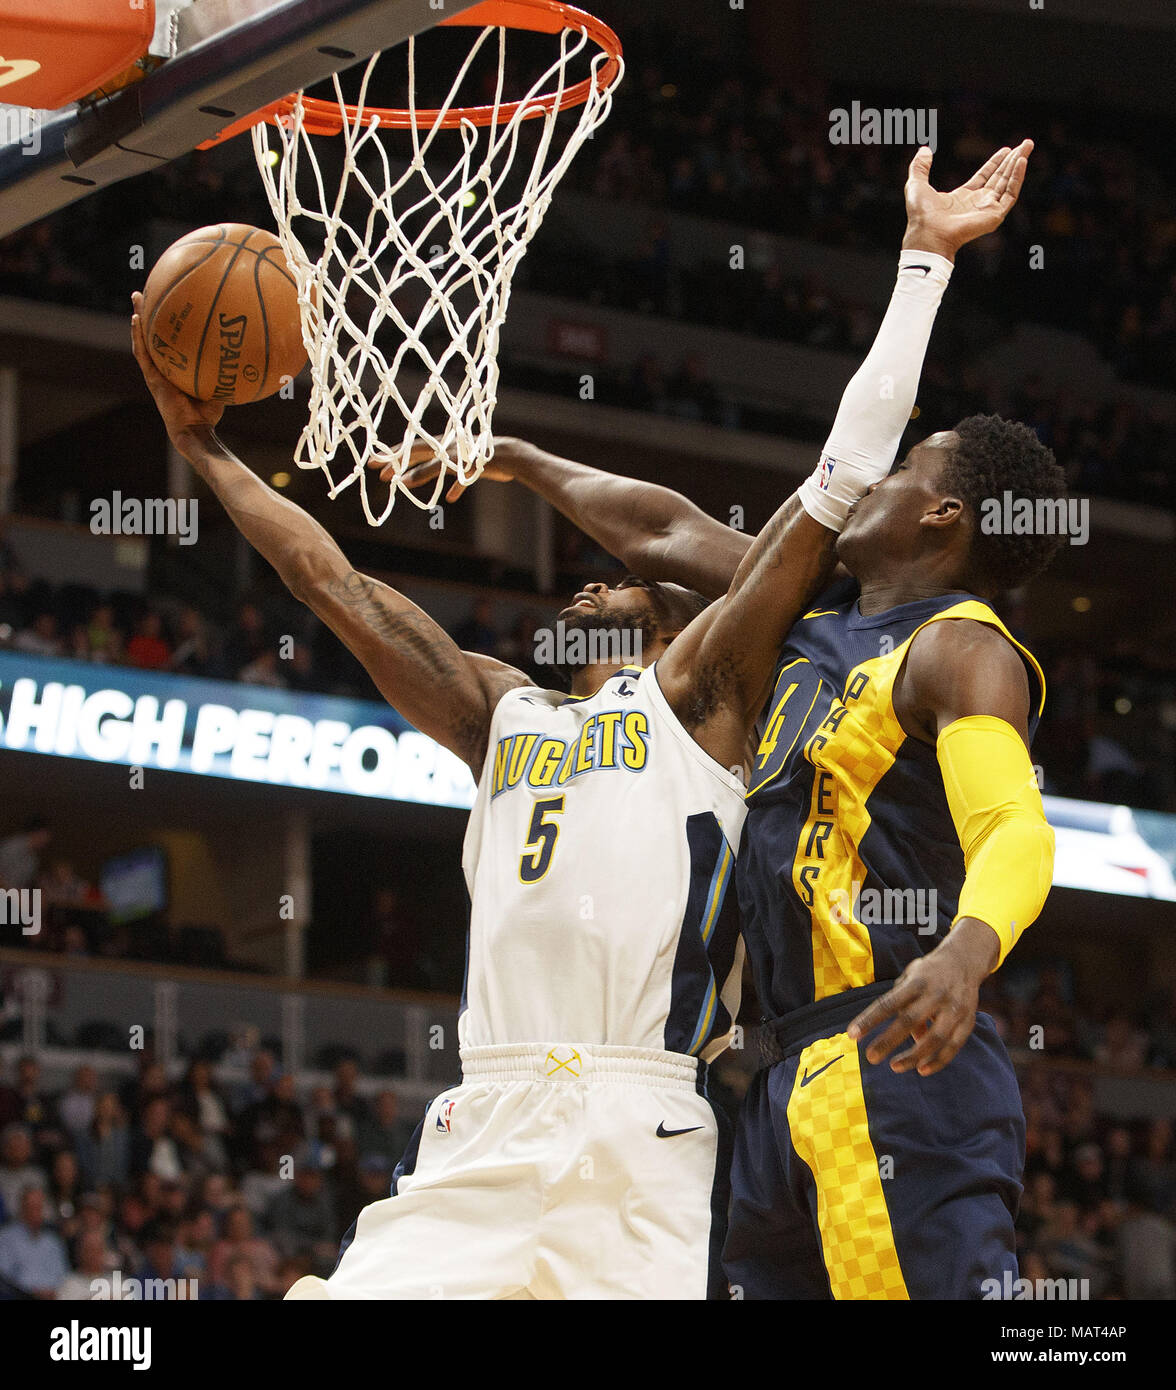 Denver, Colorado, USA. 3rd Apr, 2018. Nuggets WILL BARTON, left, gets fouled by Pacers VICTOR OLADIPO, right, during the 1st. Half at the Pepsi Center Tuesday Night. The Nuggets beat the Pacers 107-104. Credit: Hector Acevedo/ZUMA Wire/Alamy Live News Stock Photo